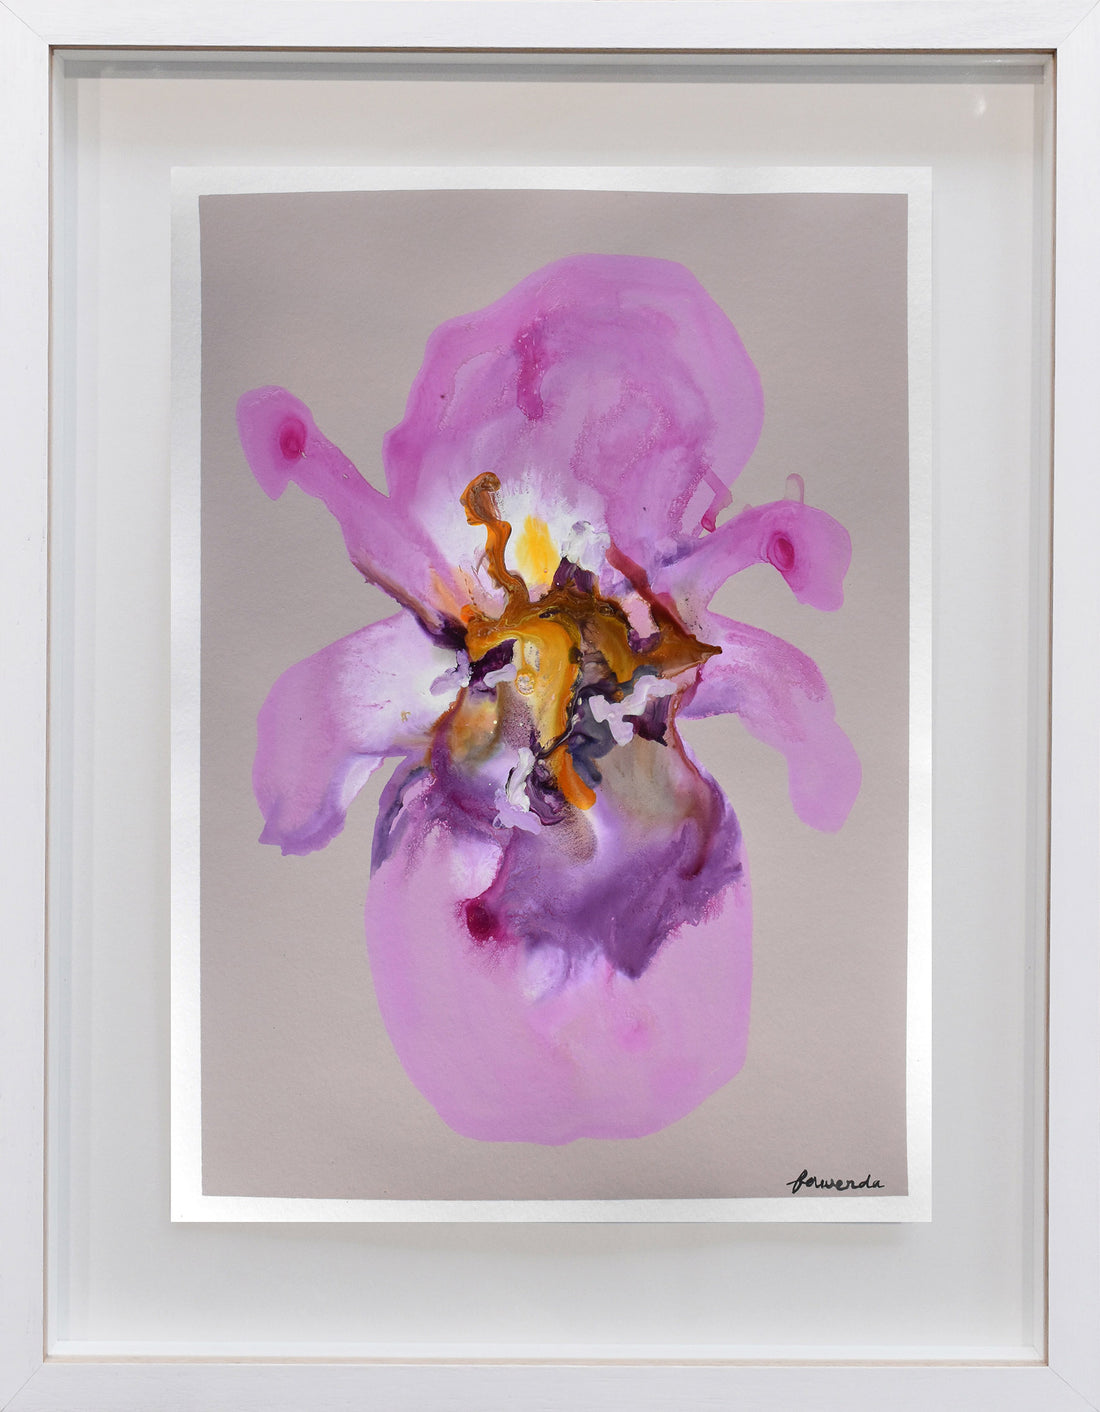 Antoinette Ferwerda | Precious (2022) - Original artwork on paper, framed behind glass in natural oak with a white painted facade (56.5cm x 44cm)